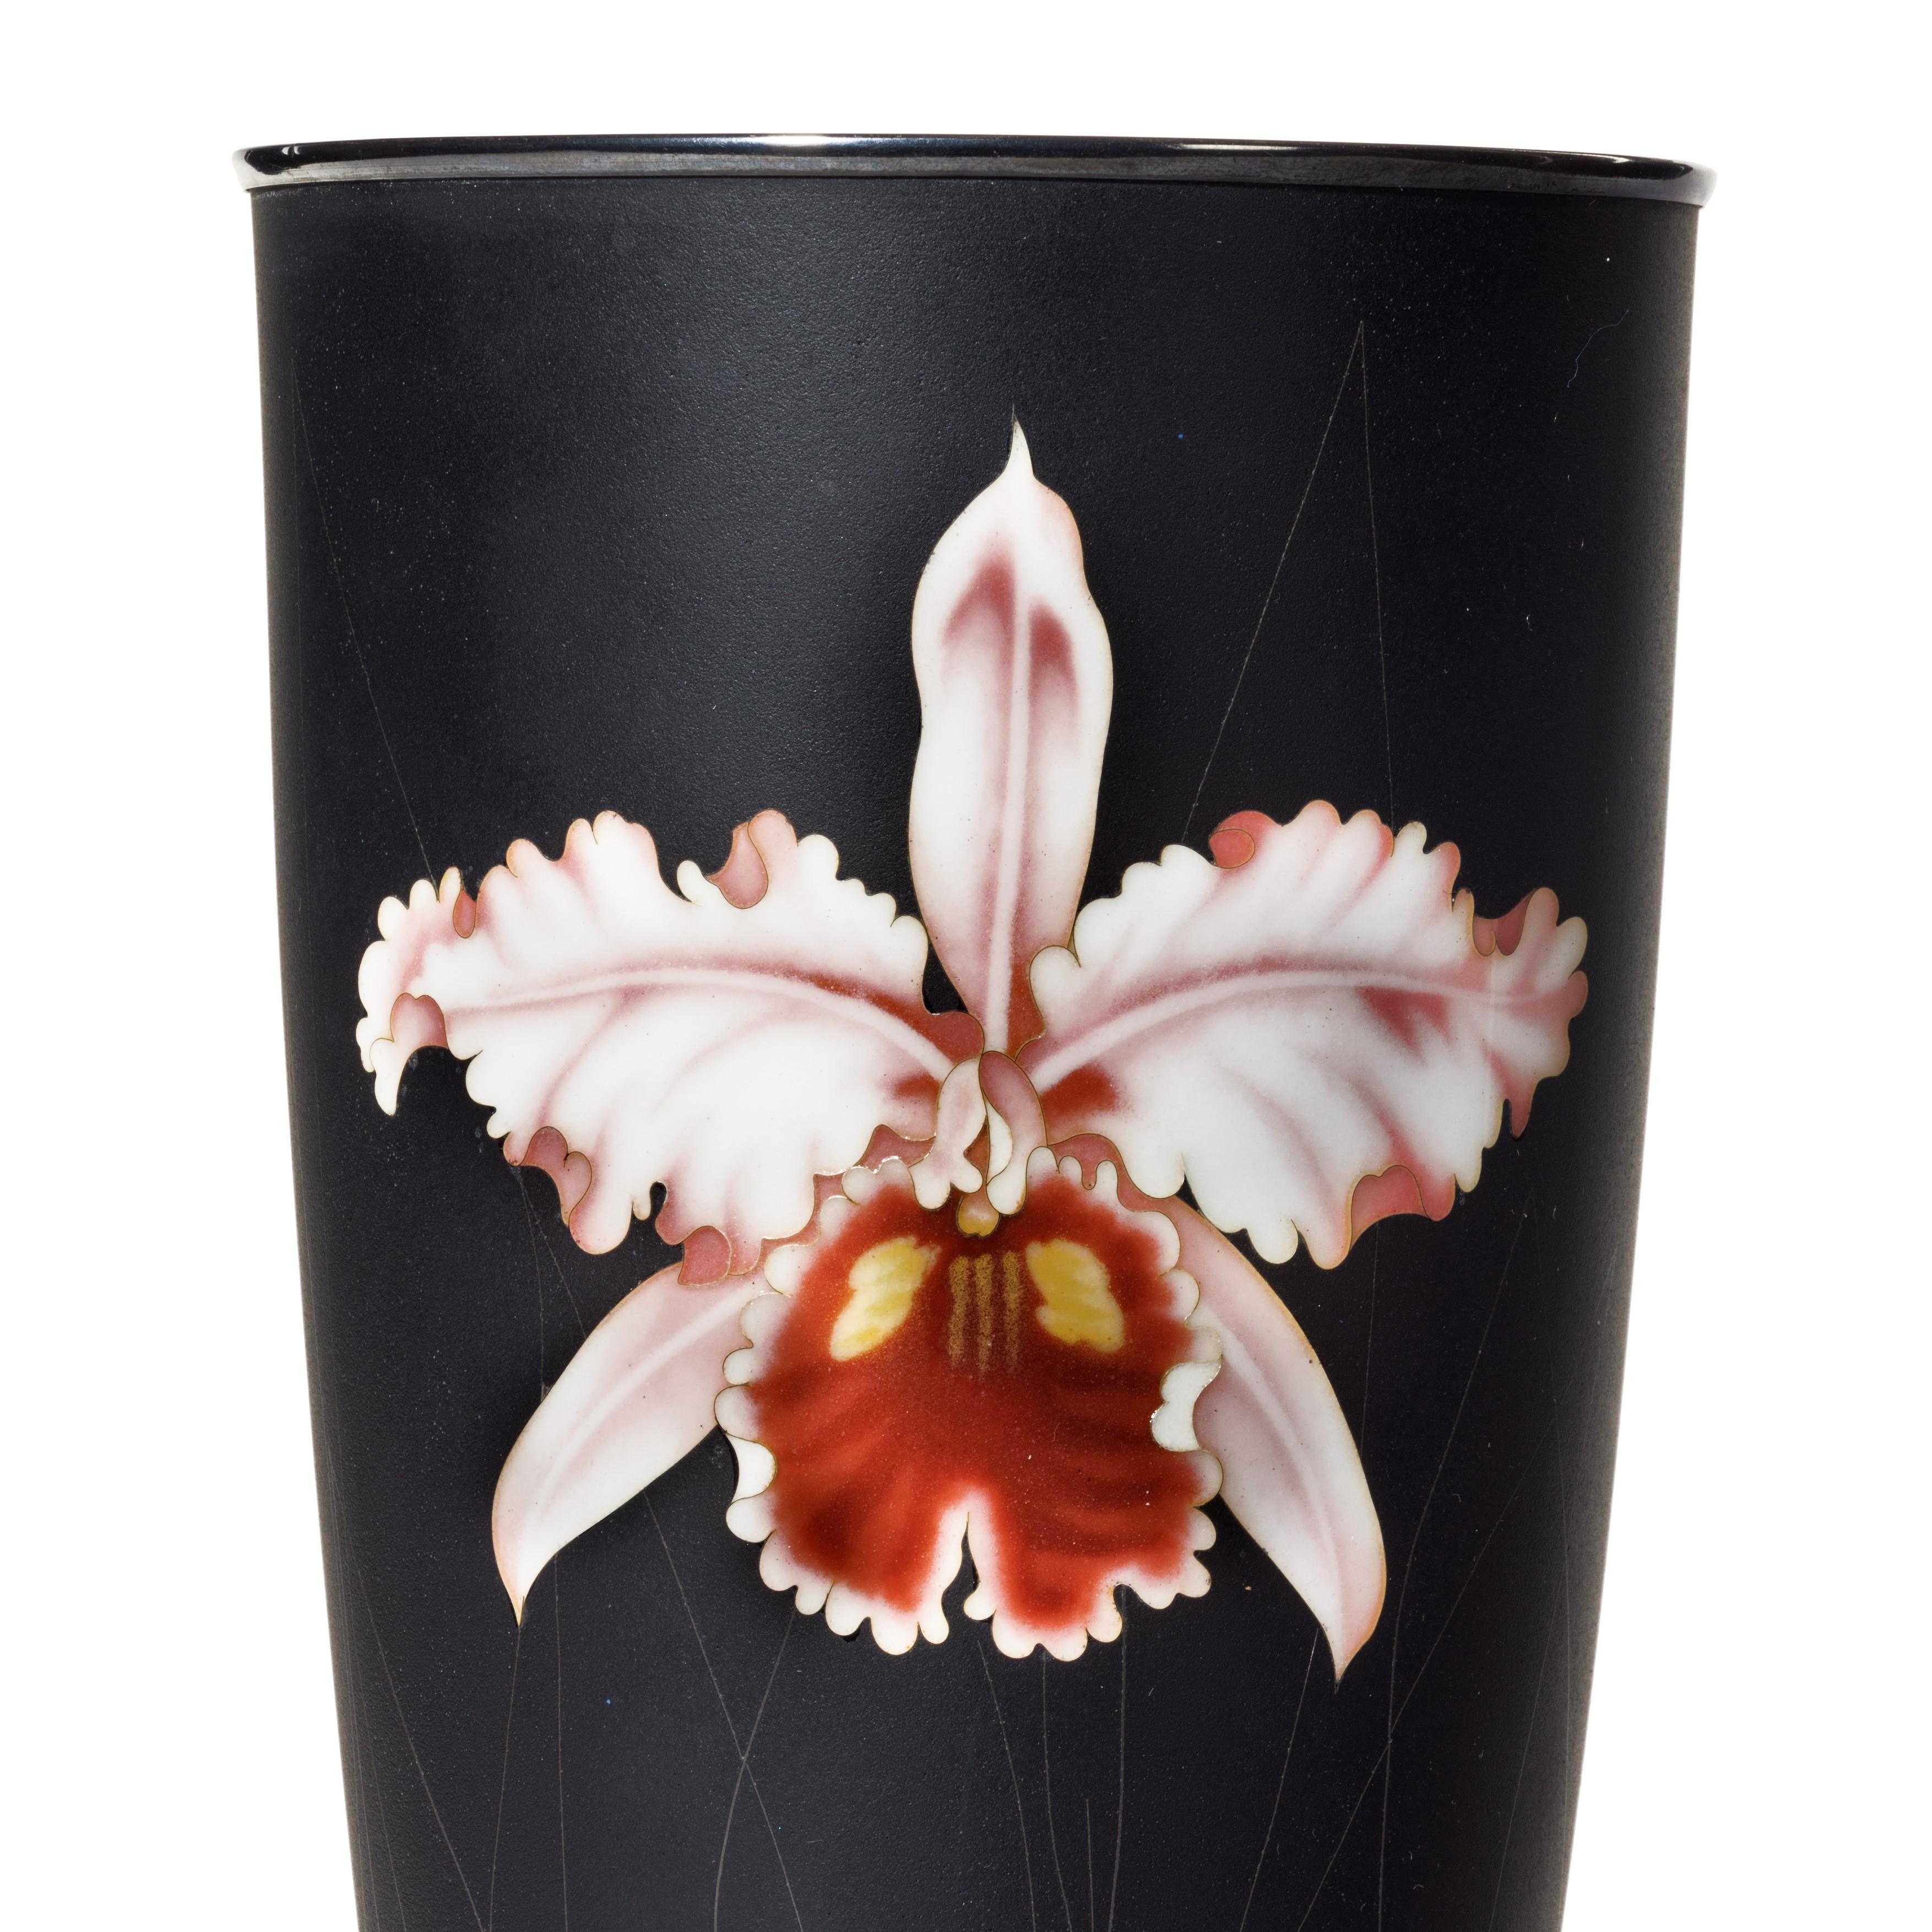 A stylish Showa period cloisonné enamel beaker vase by Ando, with a single pink orchid on a mat black ground, with the Ando wire mark in the base and assay stamped silver mounts.  Japanese, c1950.

Height 10 inches Diameter 5 inches

Footnote:  For